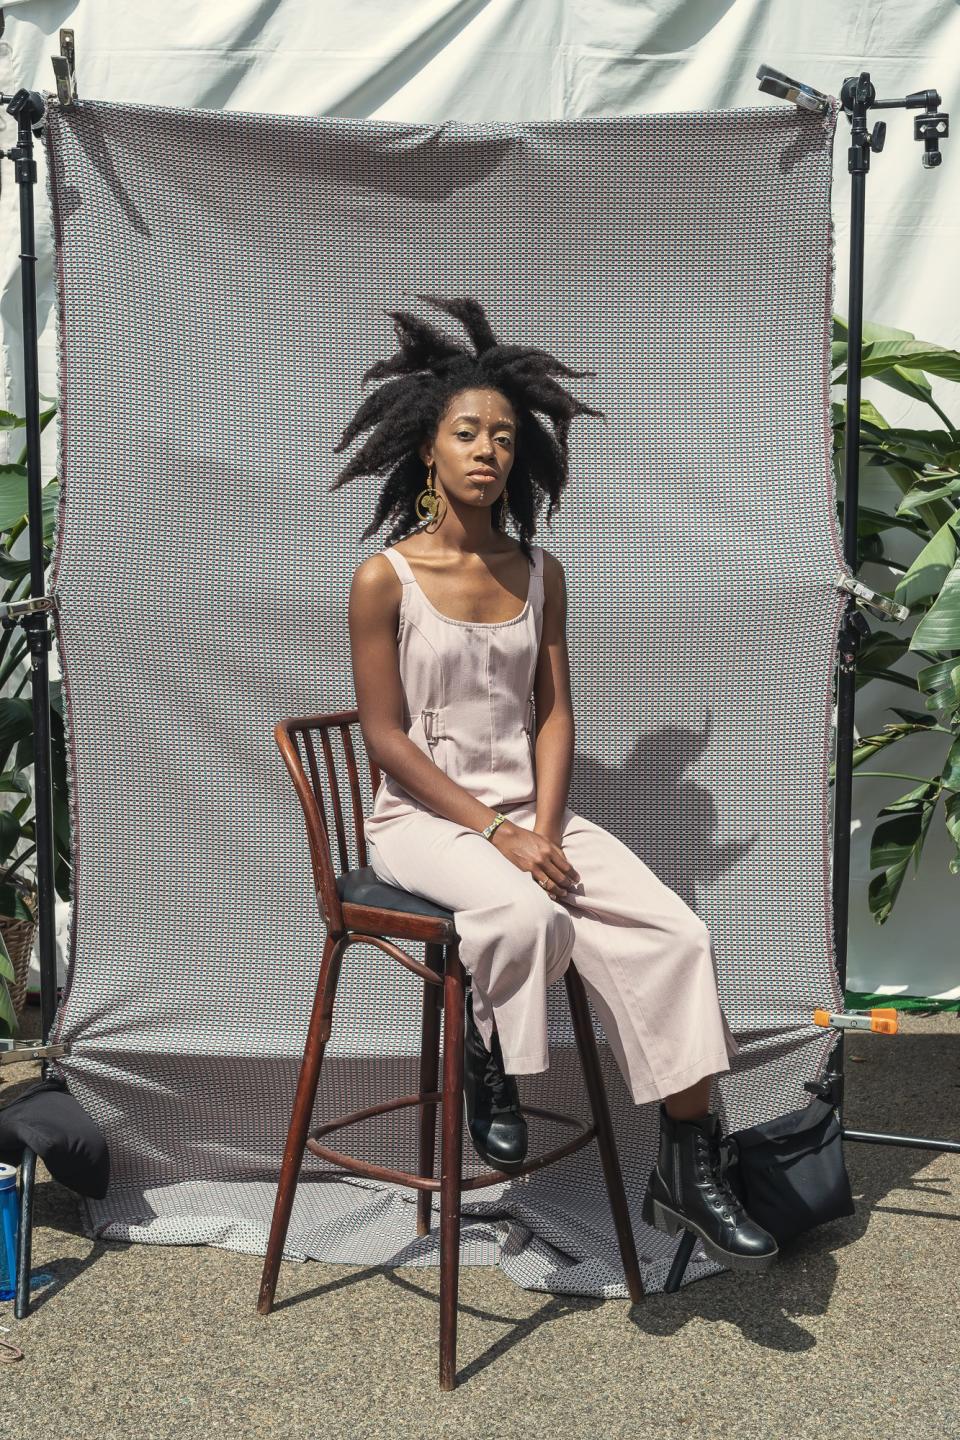 <p><strong>What does punk mean to you?</strong><br> Punk means resistance, it means going up against the system and being able to confidently say "I’m here and you can’t do anything about it".</p> <p><strong>What do you think makes the style here so special at Afropunk?</strong><br> It’s a cool space where people are able to just be themselves in whatever form they choose. Being able to share that with other black people is just a beautiful thing to have.</p> <p><strong>What inspired your look today?</strong><br> With the hair, I wanted it just to be big and to take up space.</p> <p><strong>Finish the sentence, “Black culture is…”</strong><br> Black Culture is everything</p>